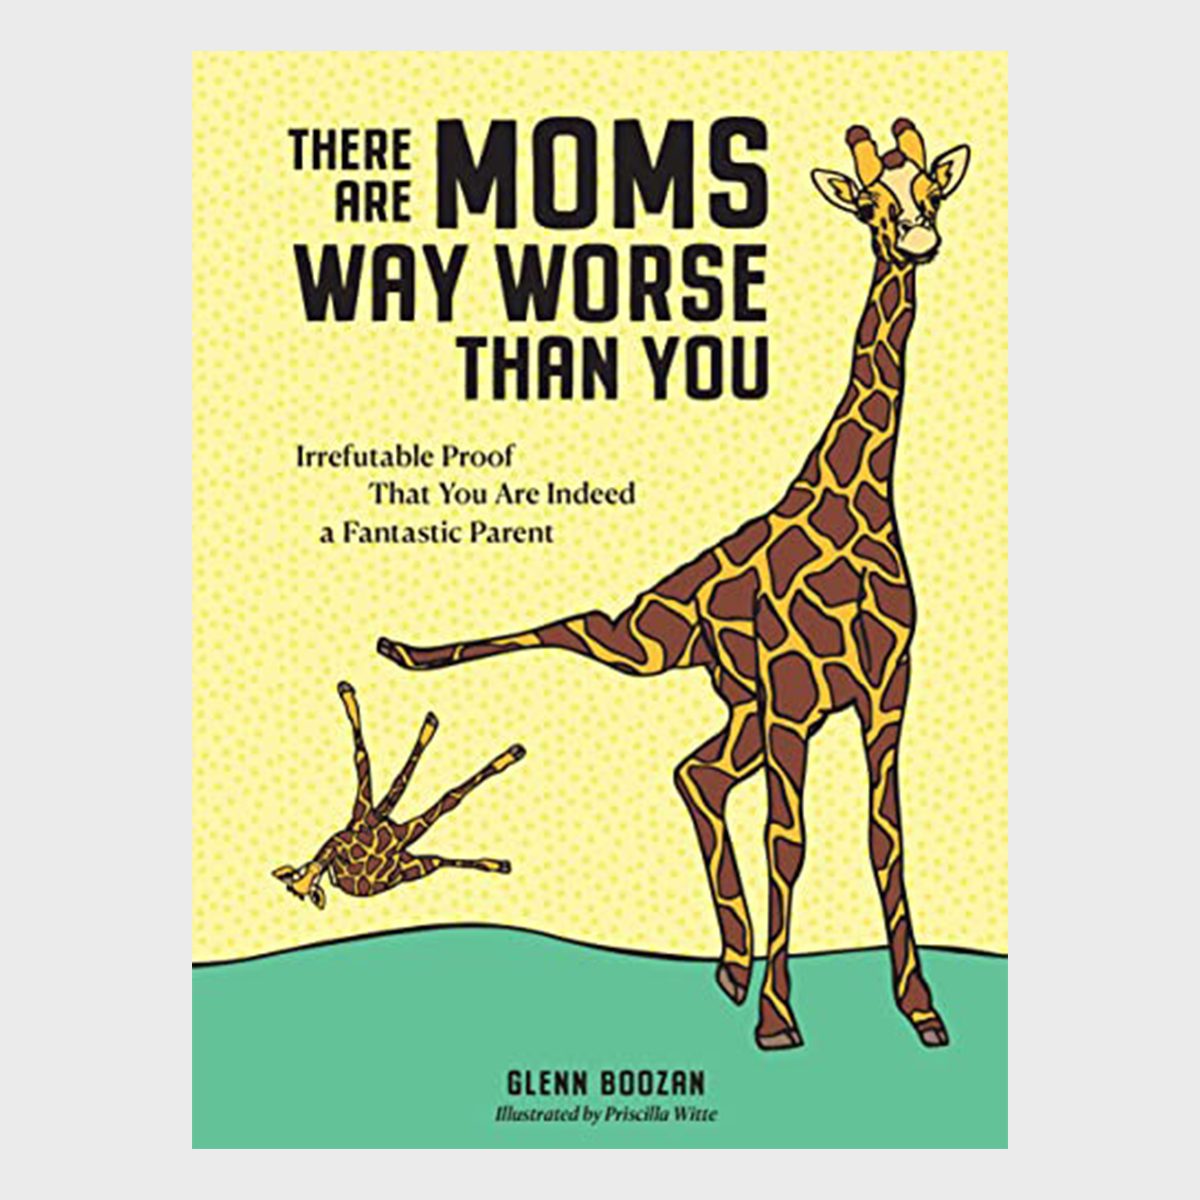 <p>Every parent has days where they feel like they're getting it all wrong. This <a href="https://www.amazon.com/There-Are-Moms-Worse-Than/dp/1523515643" rel="noopener noreferrer">cheeky book</a> will reassure new parents that they could be infinitely worse. Although the title of this book refers to moms, new parents will find quite a few references to the animal kingdom's <a href="https://www.rd.com/list/first-fathers-day-gift-ideas/">less-than-stellar dads</a> sprinkled throughout its pages. They're sure to come away feeling like their best really is good enough.</p> <p class="listicle-page__cta-button-shop"><a class="shop-btn" href="https://www.amazon.com/There-Are-Moms-Worse-Than/dp/1523515643">Shop Now</a></p>